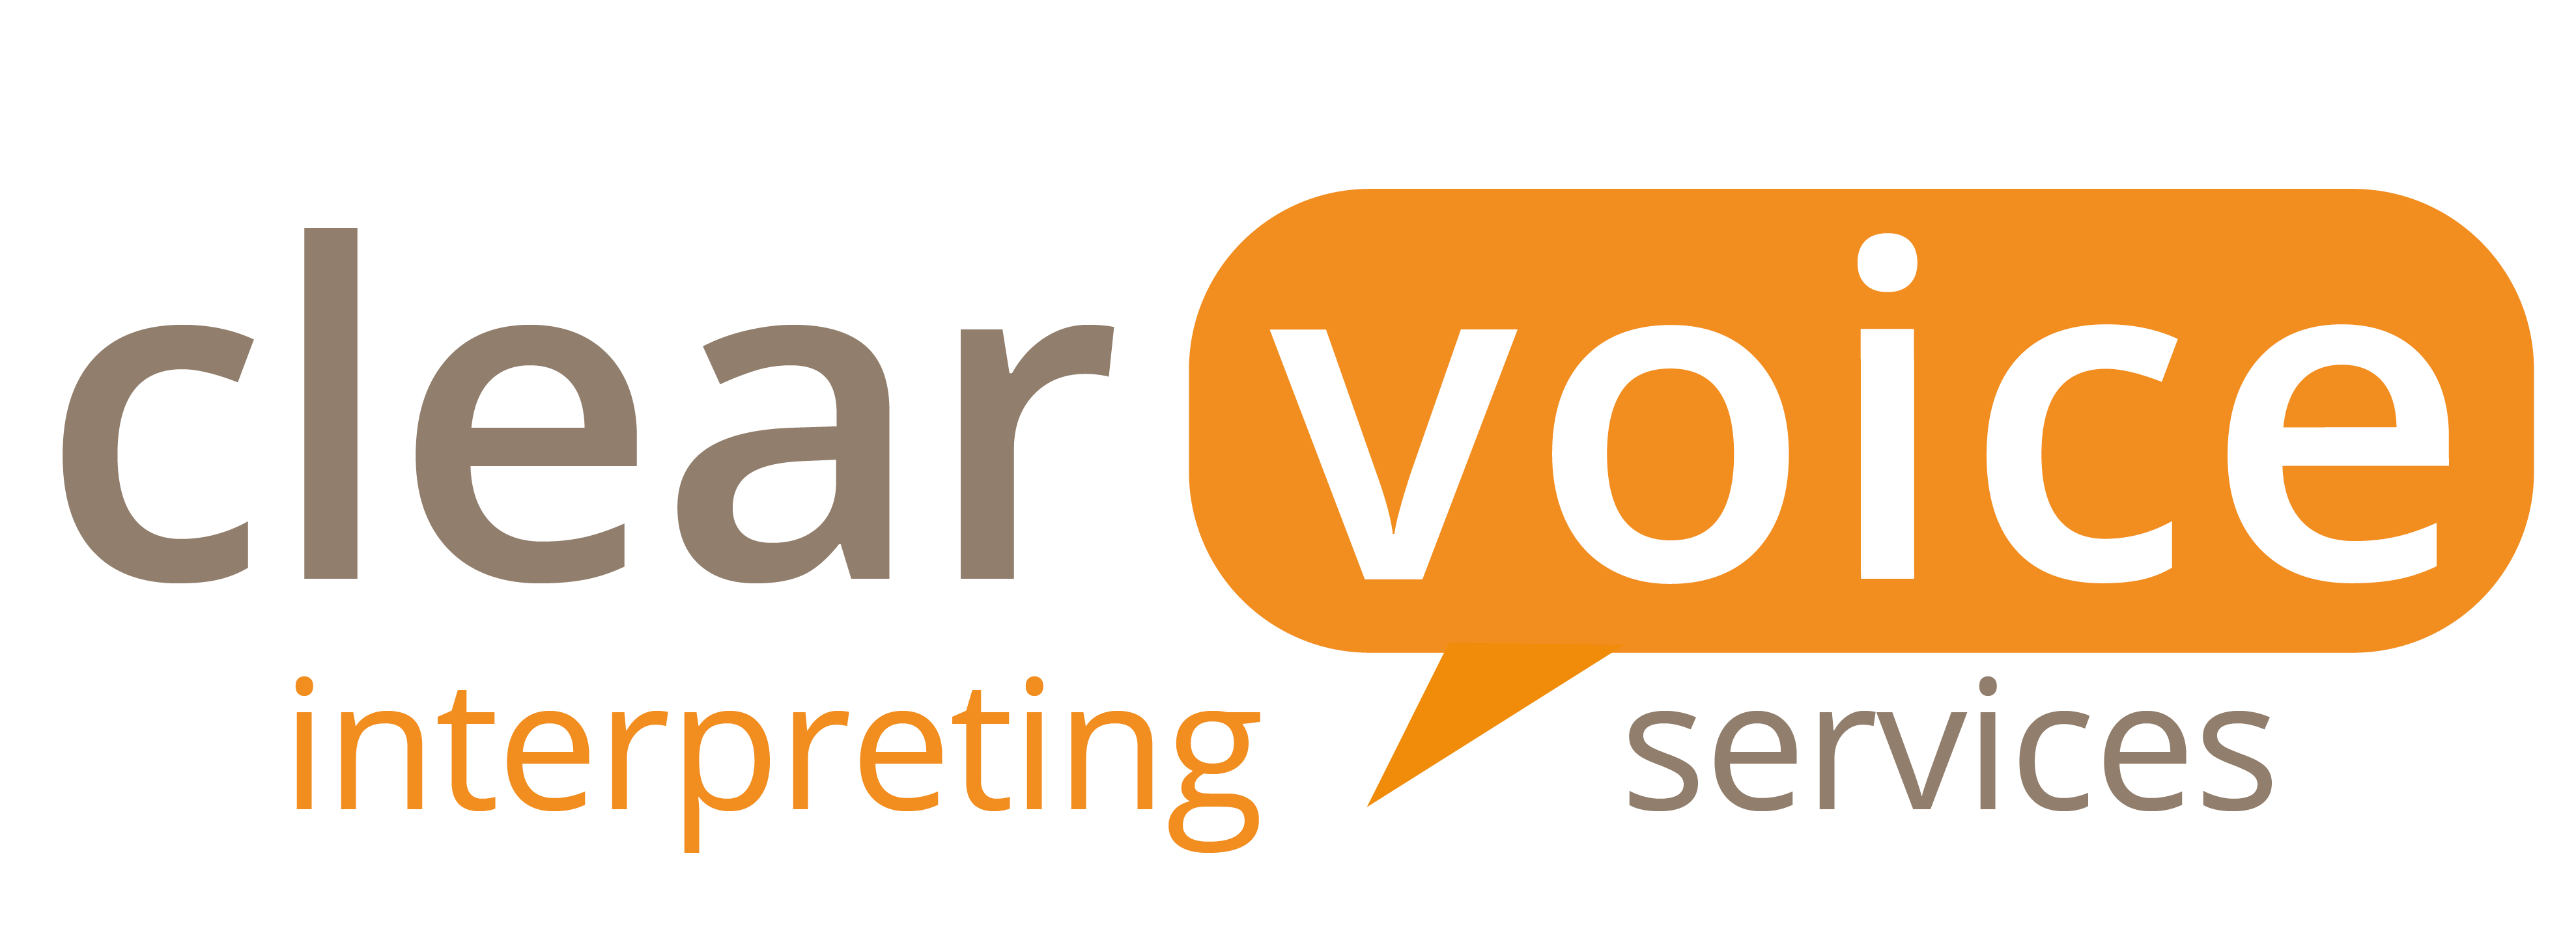 logo for Clear Voice Interpreting Services